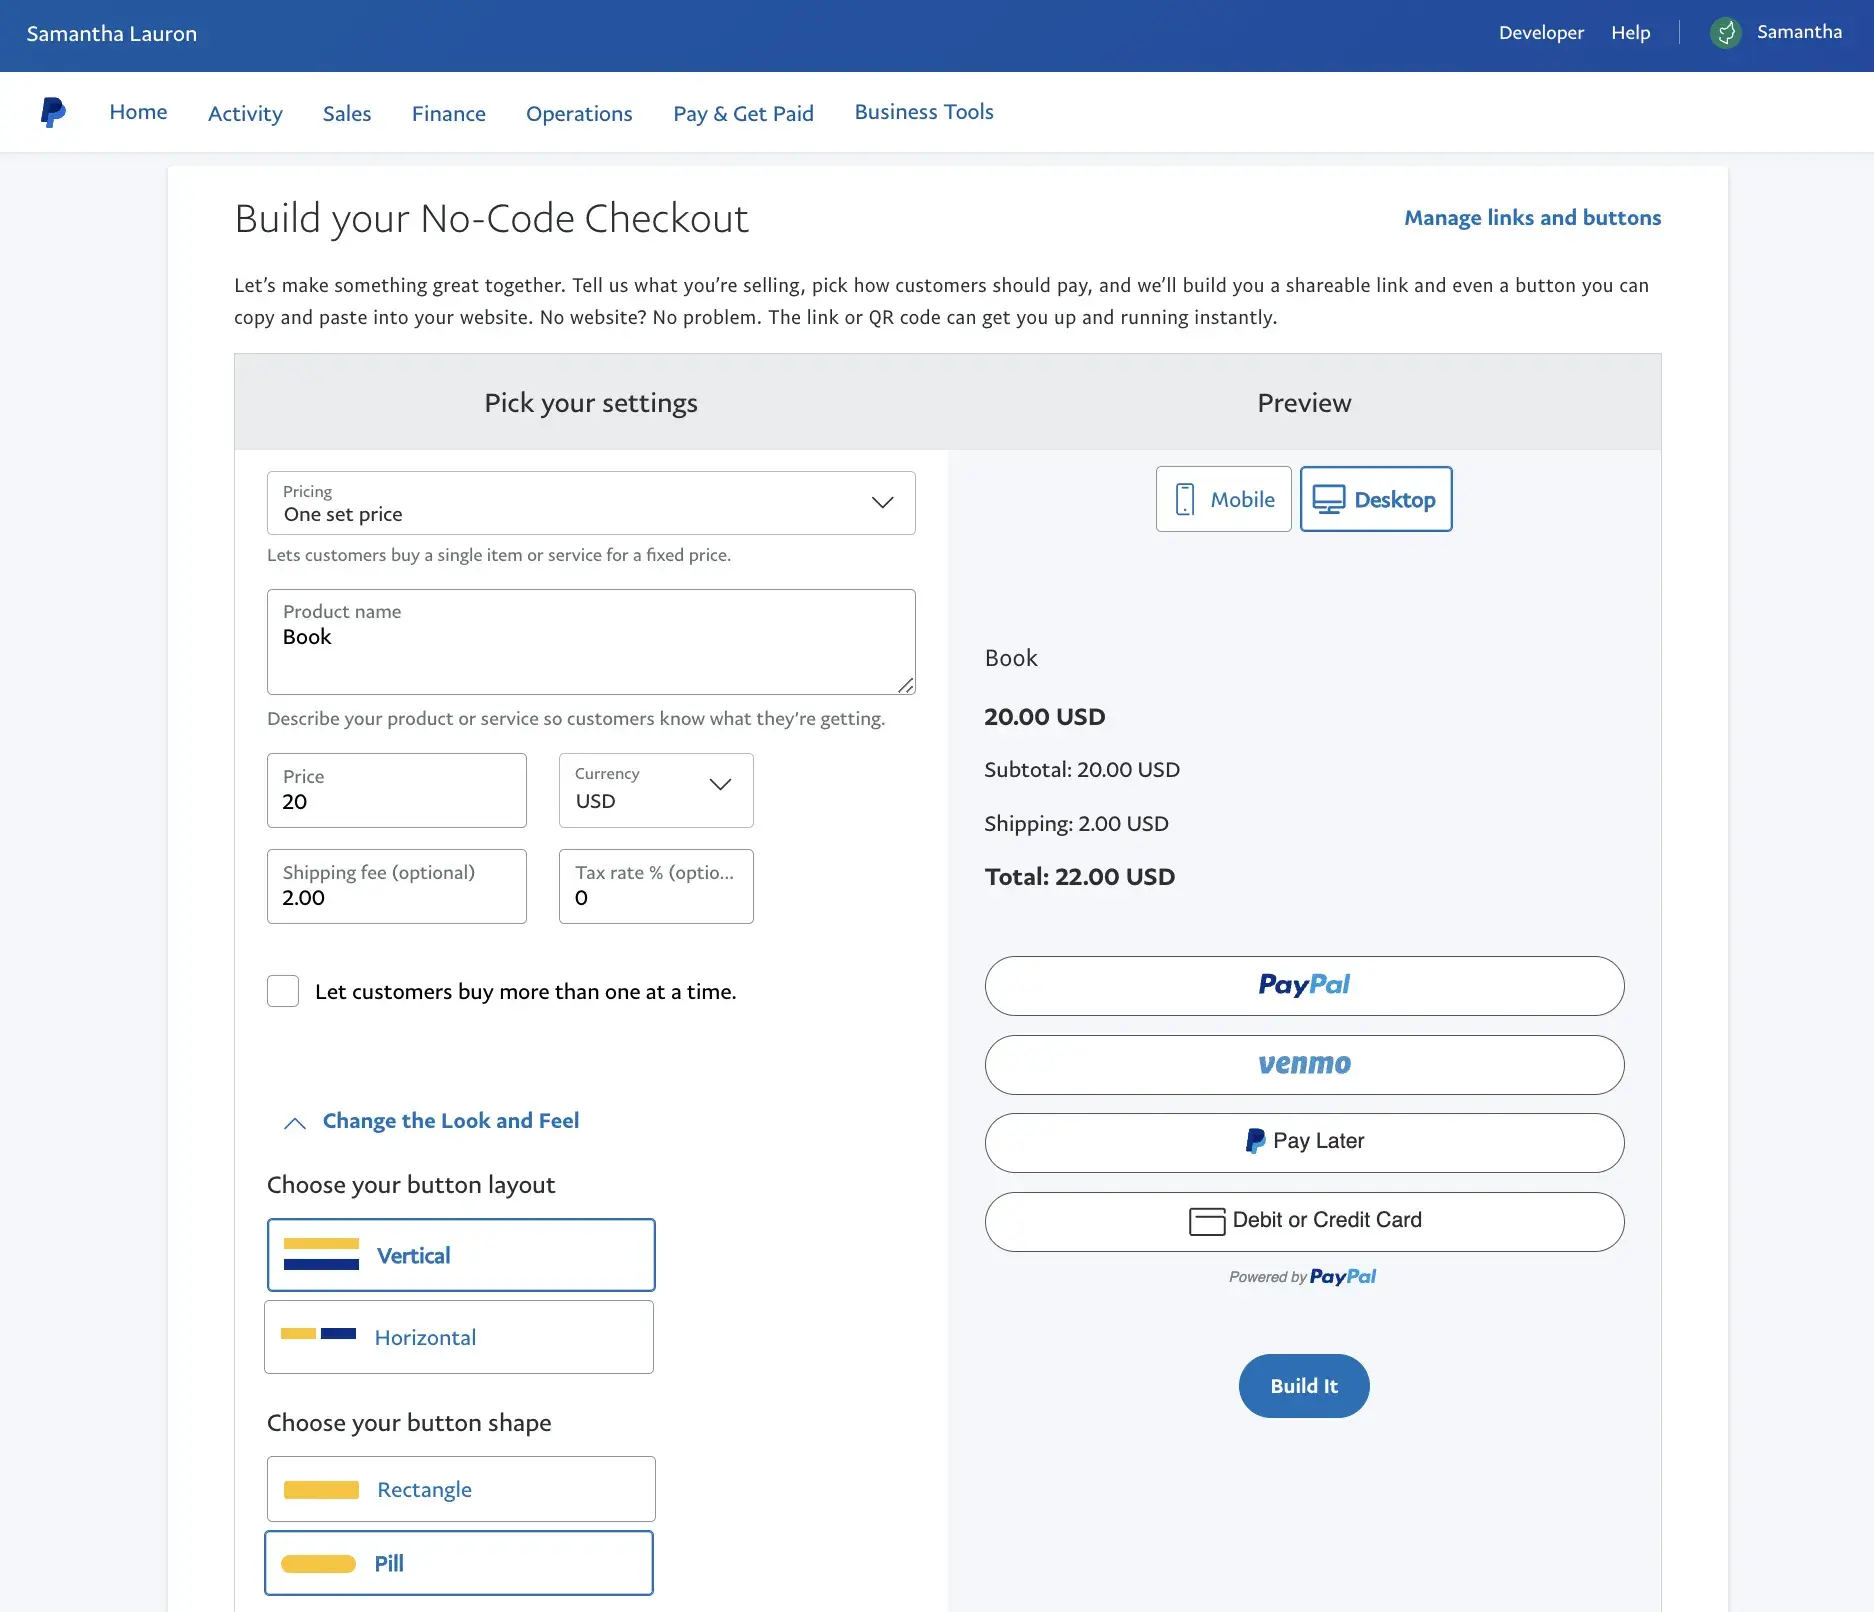 Building a checkout page for an ecommerce business using PayPal. The popular payment processing company offers a user-friendly interface and experience. 